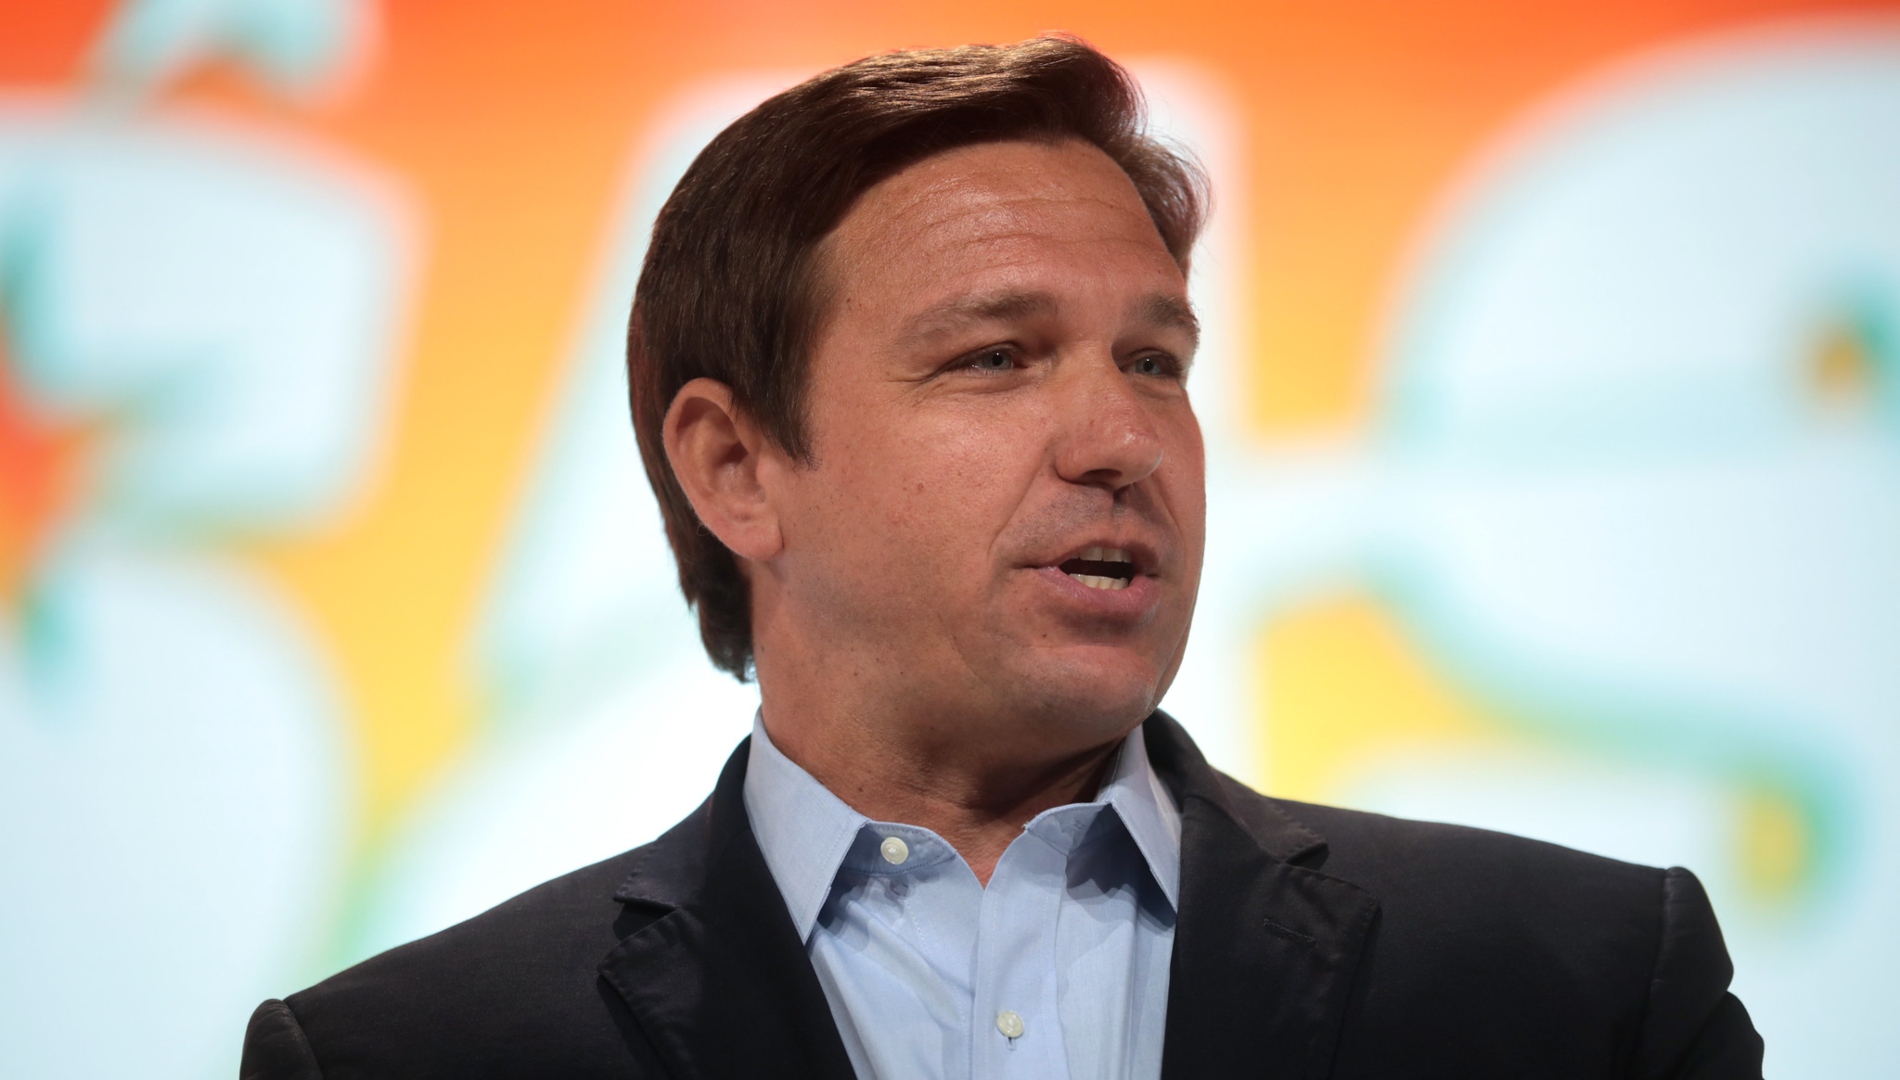 DeSantis promises to hold Pfizer, Moderna accountable for making false claims about covid “vaccines”